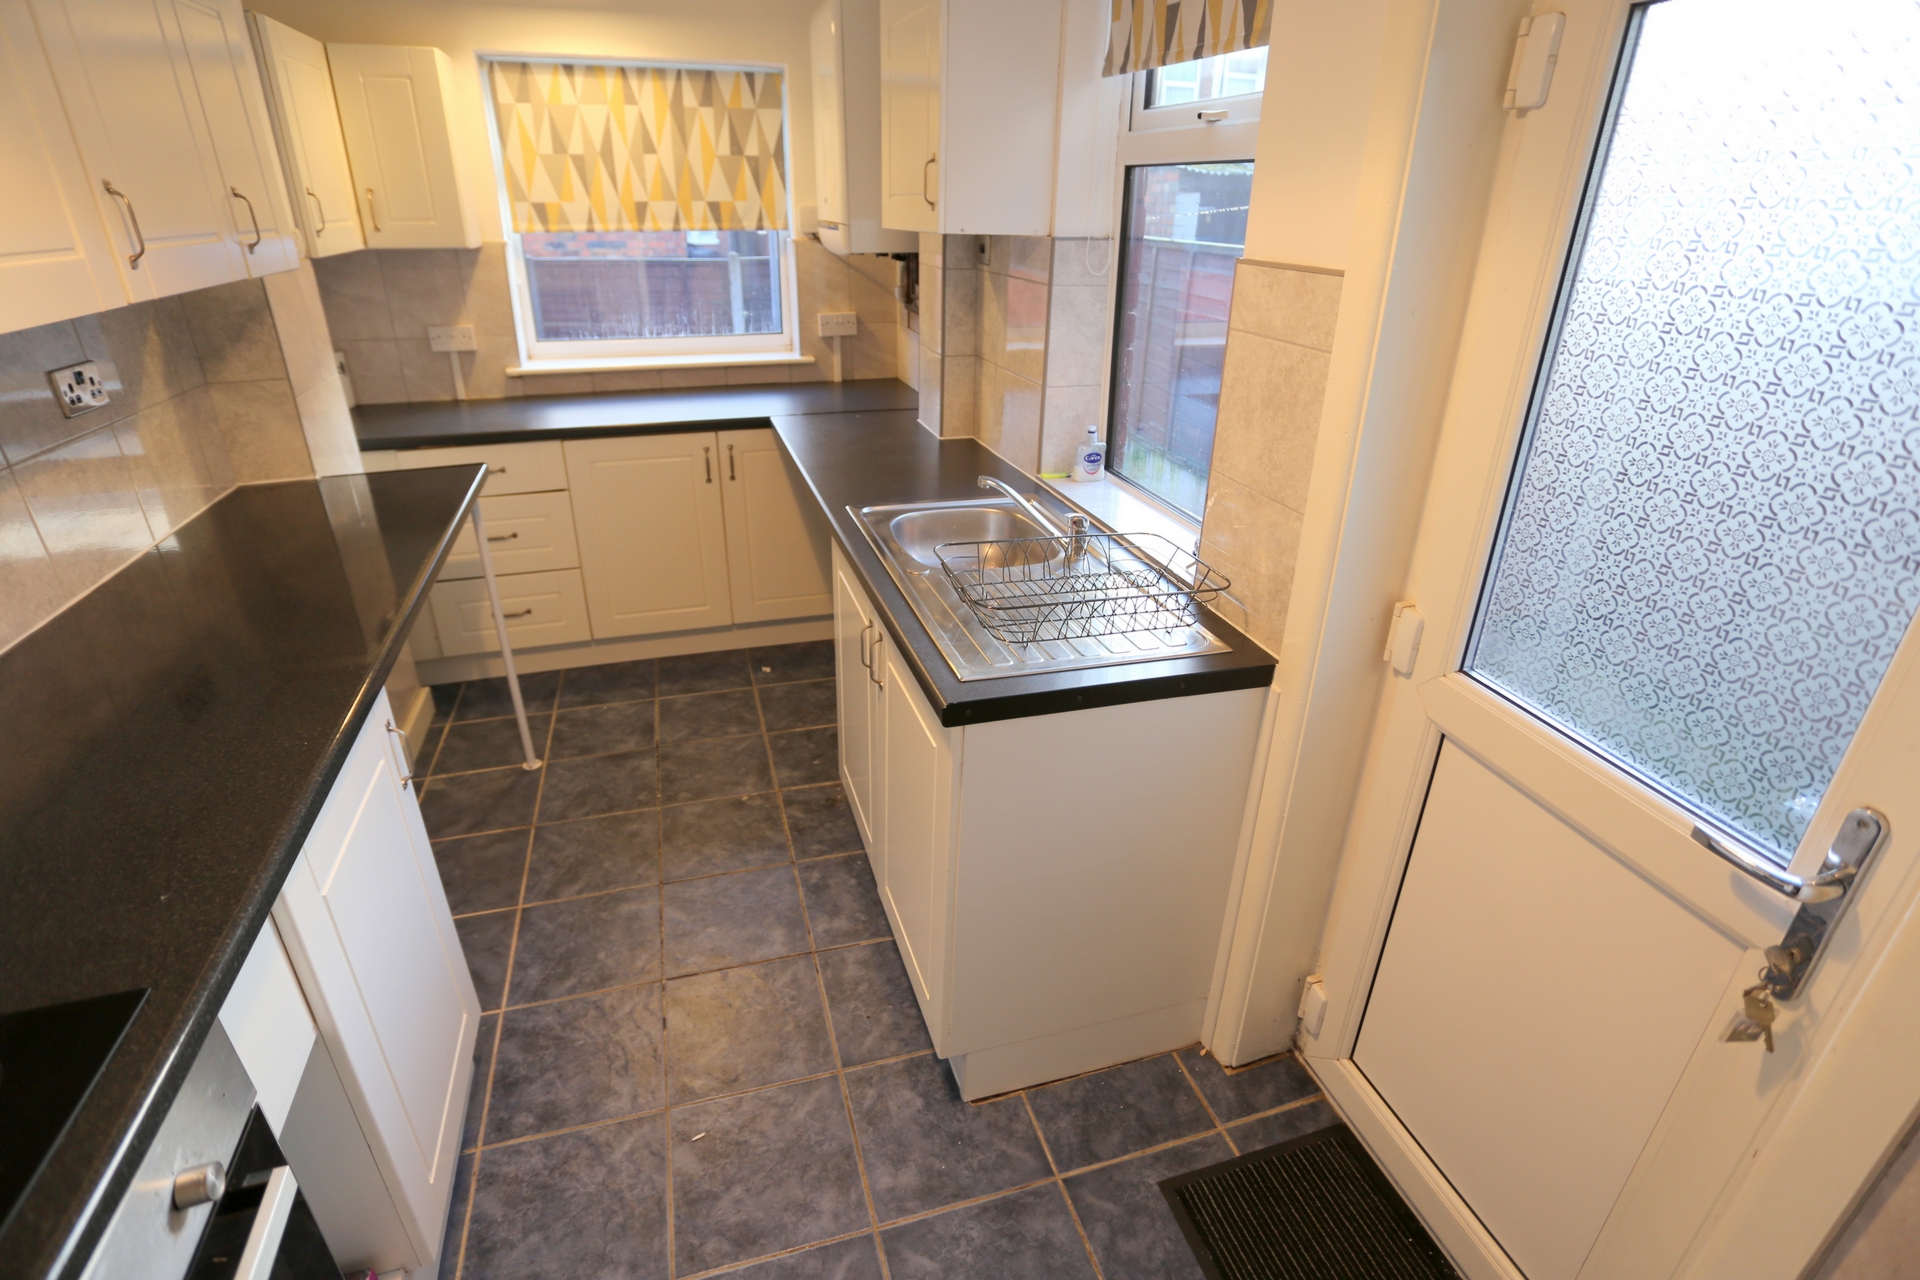 2 bedrooms terraced, 79 Ludford Street Crewe Cheshire